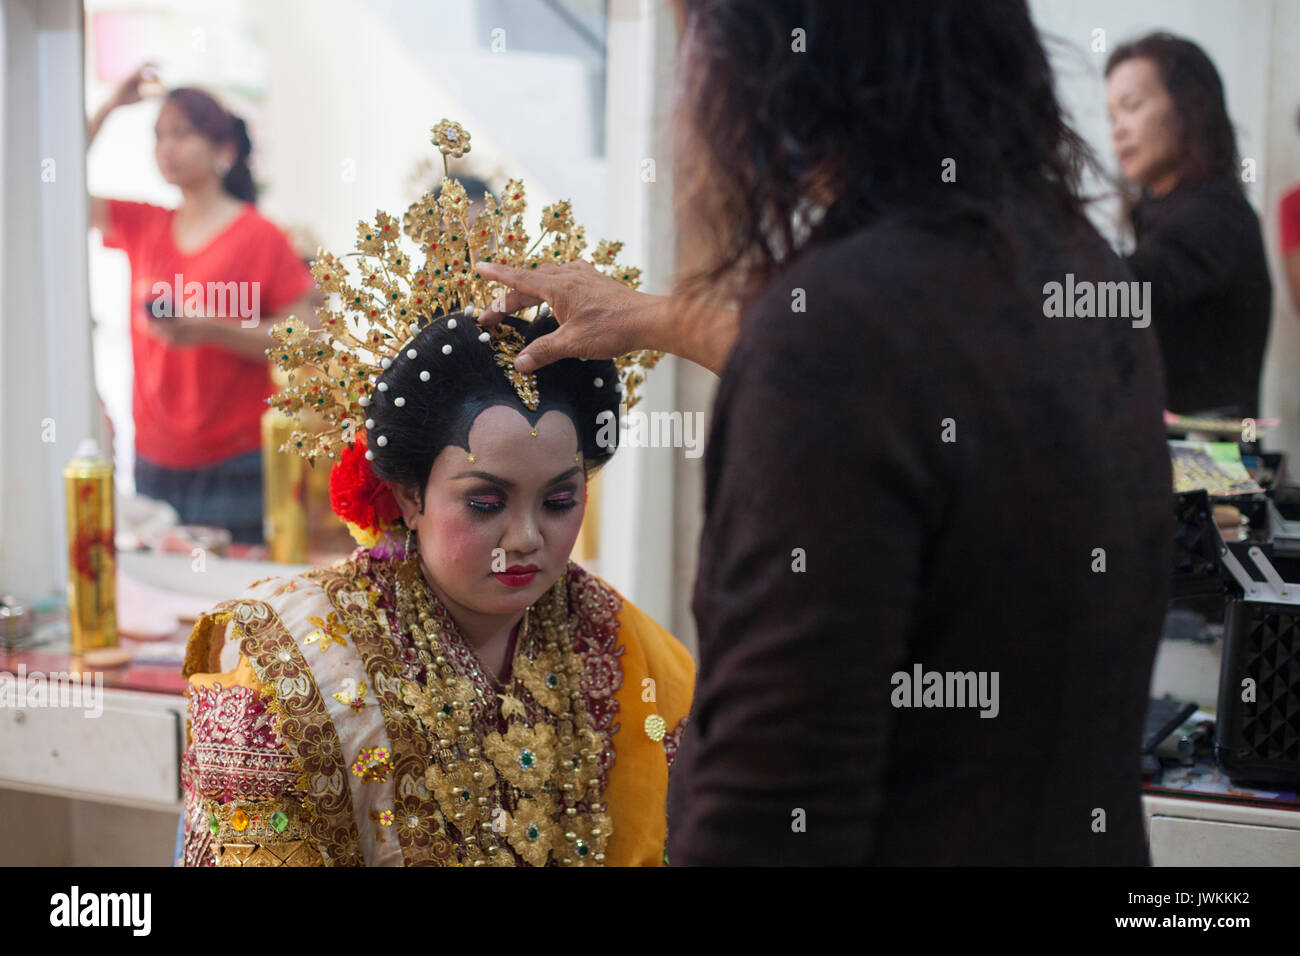 After finishing the makeup and dressing Rika, the future bride, in her wedding dress, Ibu Haji Hasna gives her a final blessing, placing a hand on her head and whispering a prayer. Stock Photo